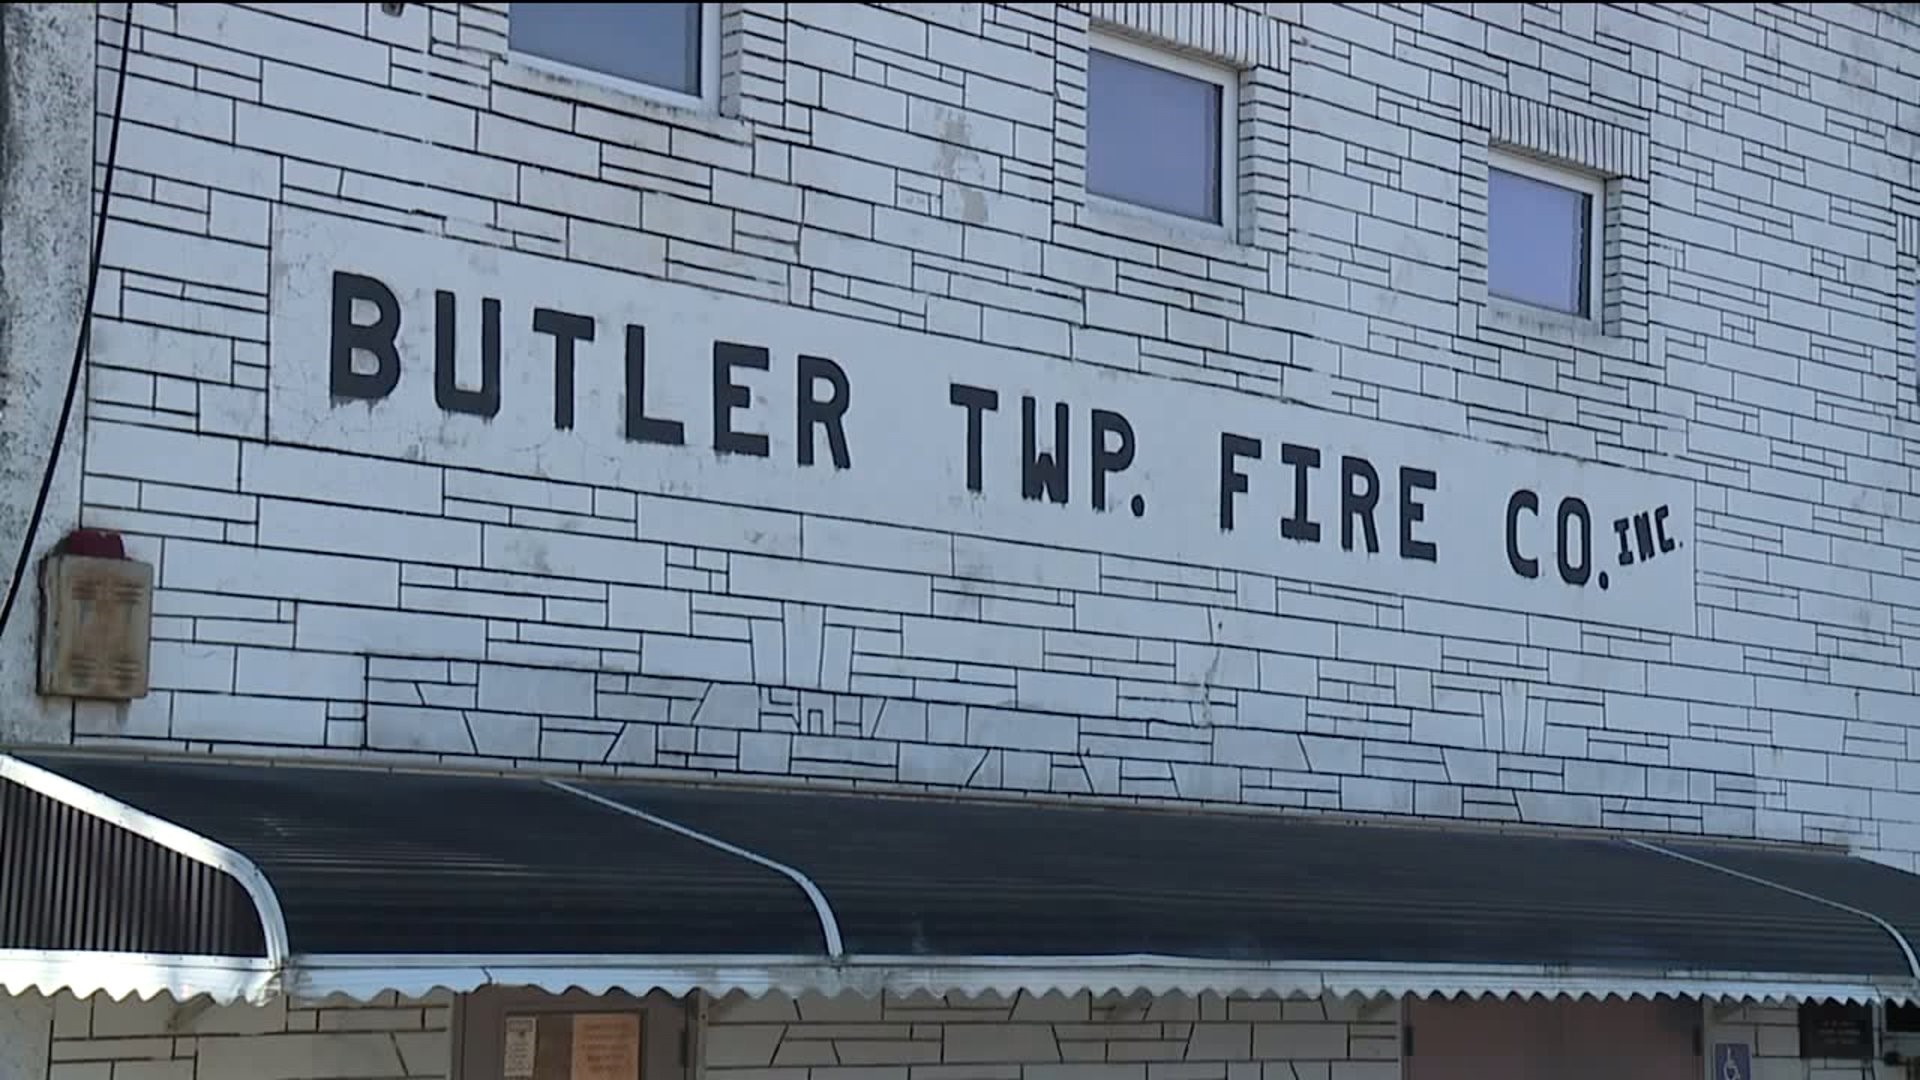 Woman Accused of Stealing from Fire Department Social Club